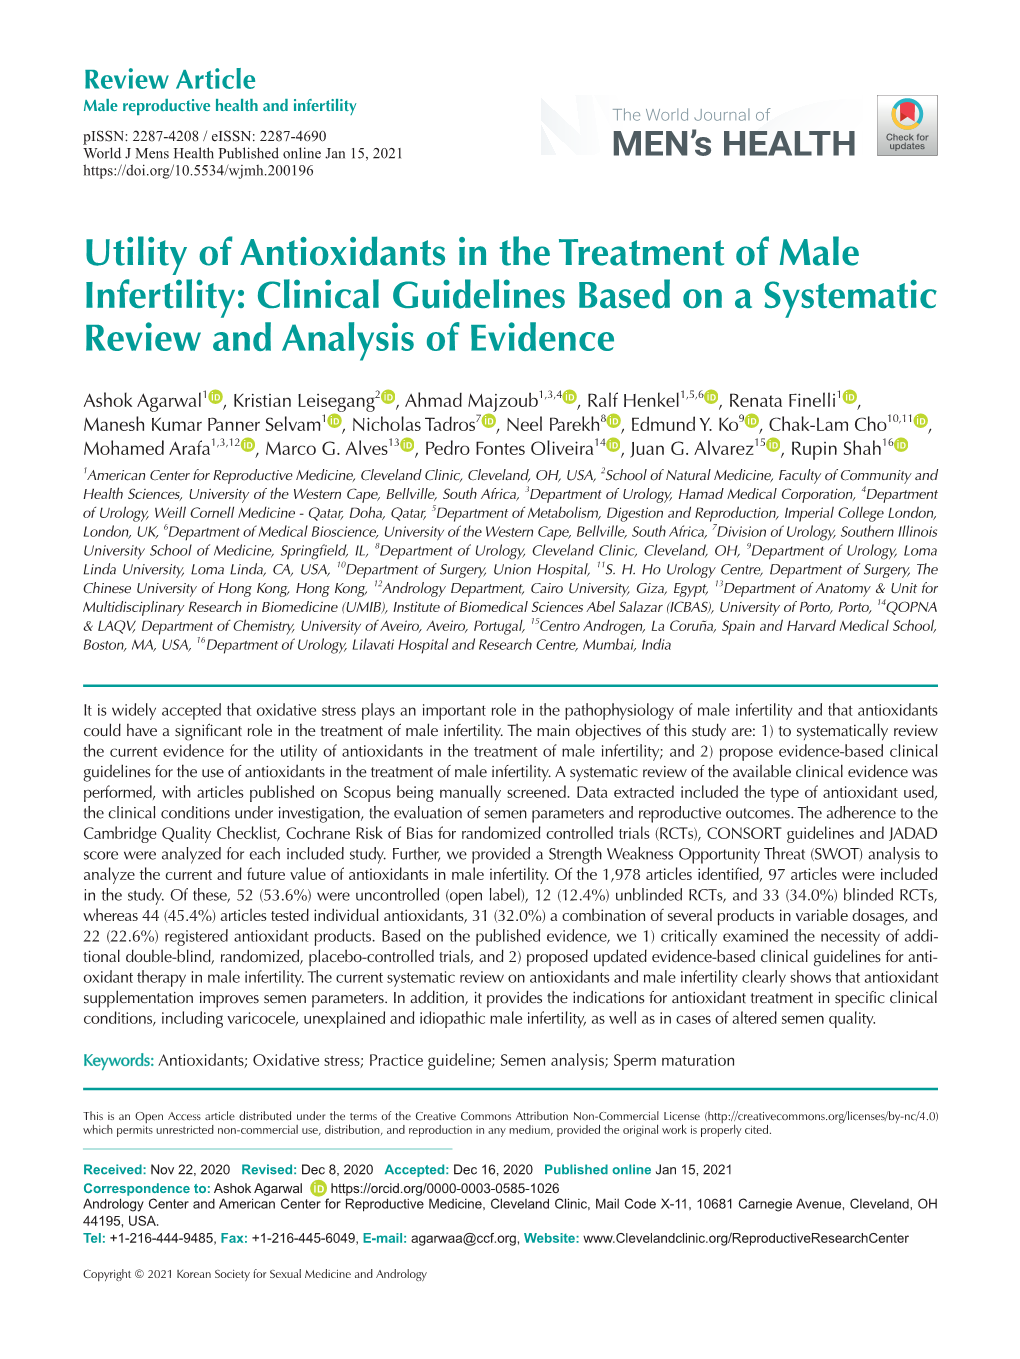 Utility of Antioxidants in the Treatment of Male Infertility: Clinical Guidelines Based on a Systematic Review and Analysis of Evidence